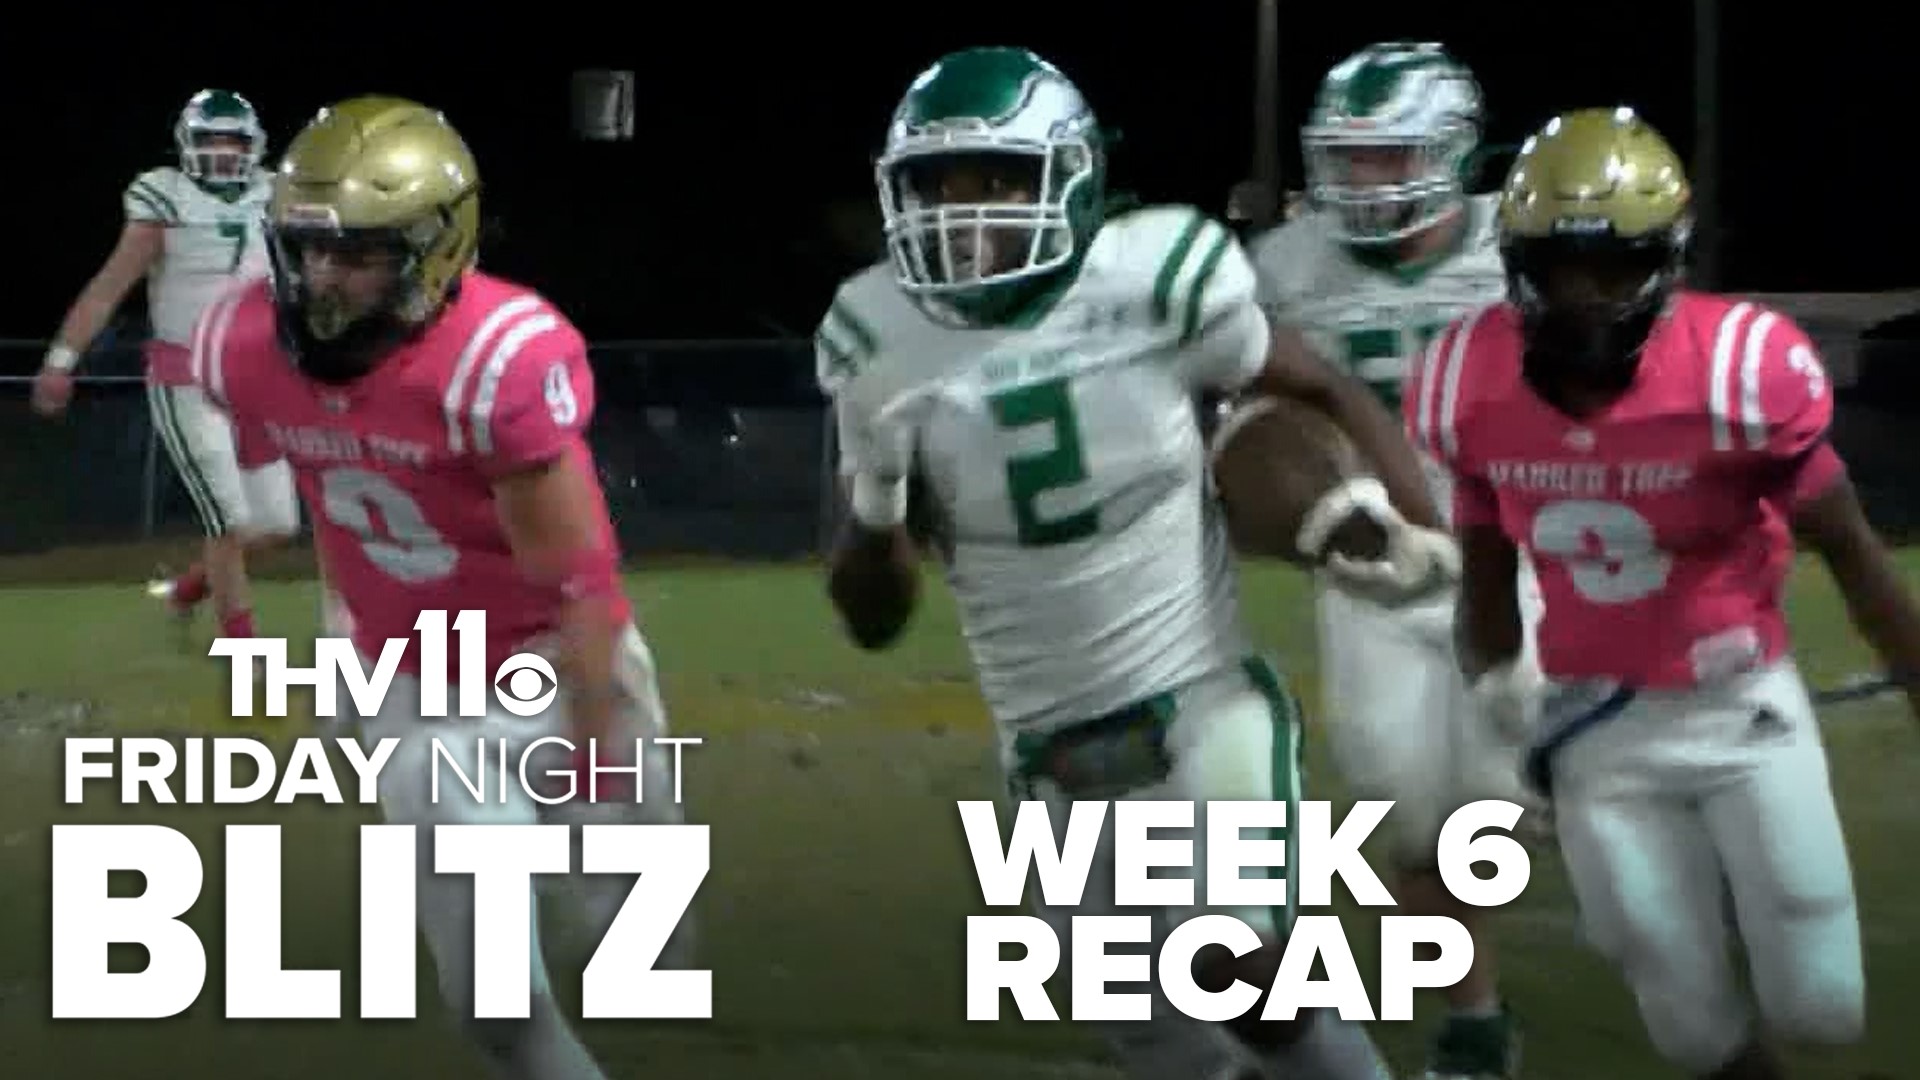 Cierra Clark and Craig O'Neill have your complete recap for Week 6 of Arkansas high school football.